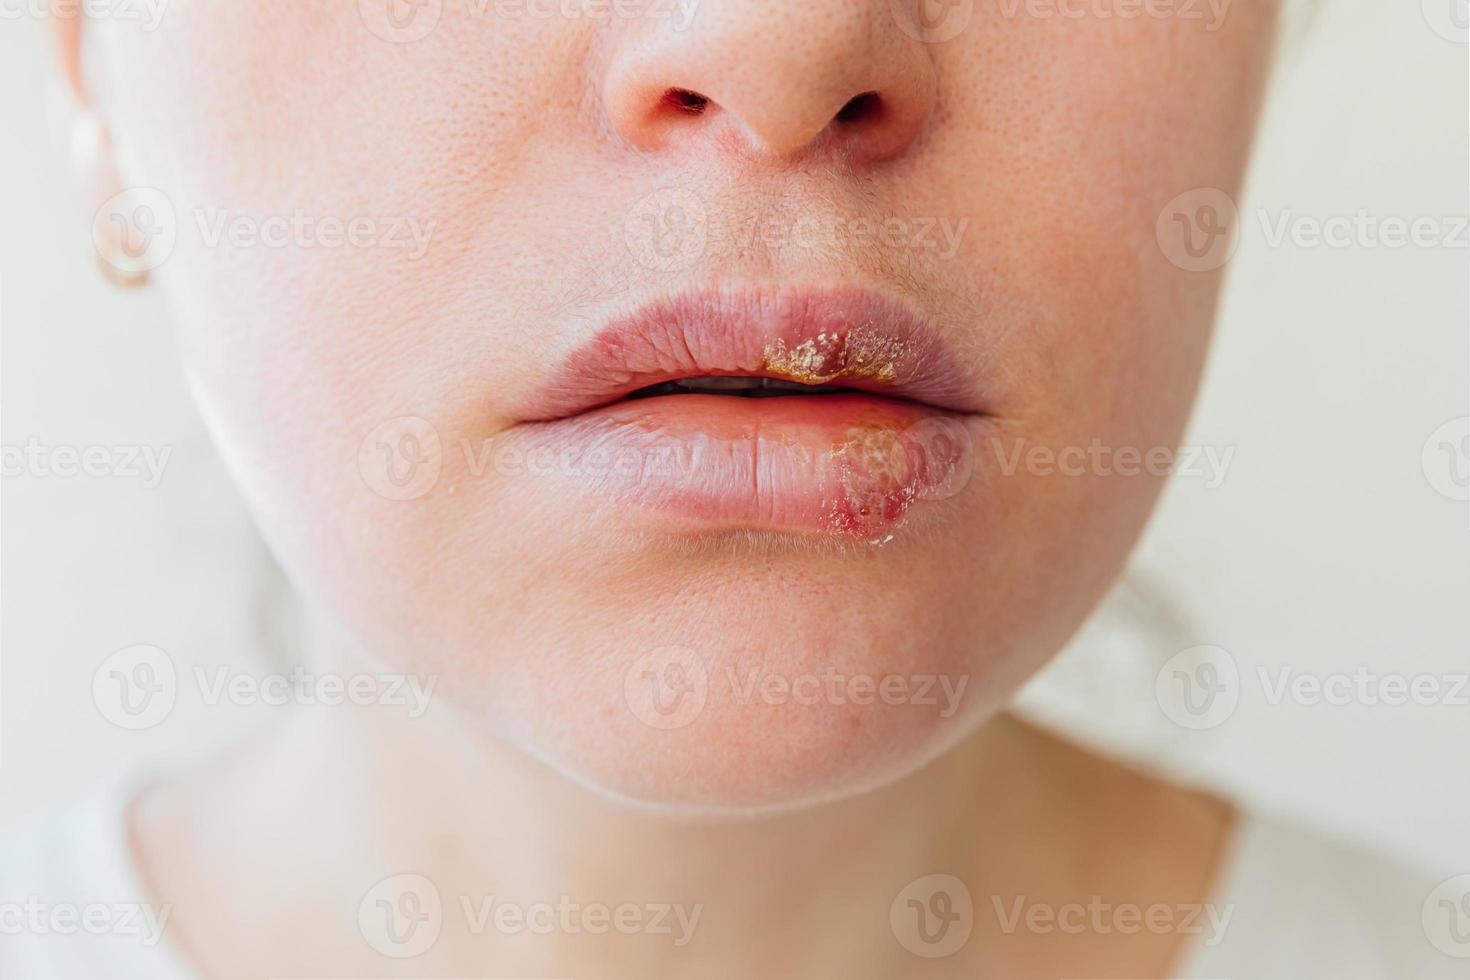 Close up of girl lips affected by herpes. Treatment of herpes infection and virus. Part of young woman face, lips with herpes affected. Beauty dermatology concept. photo